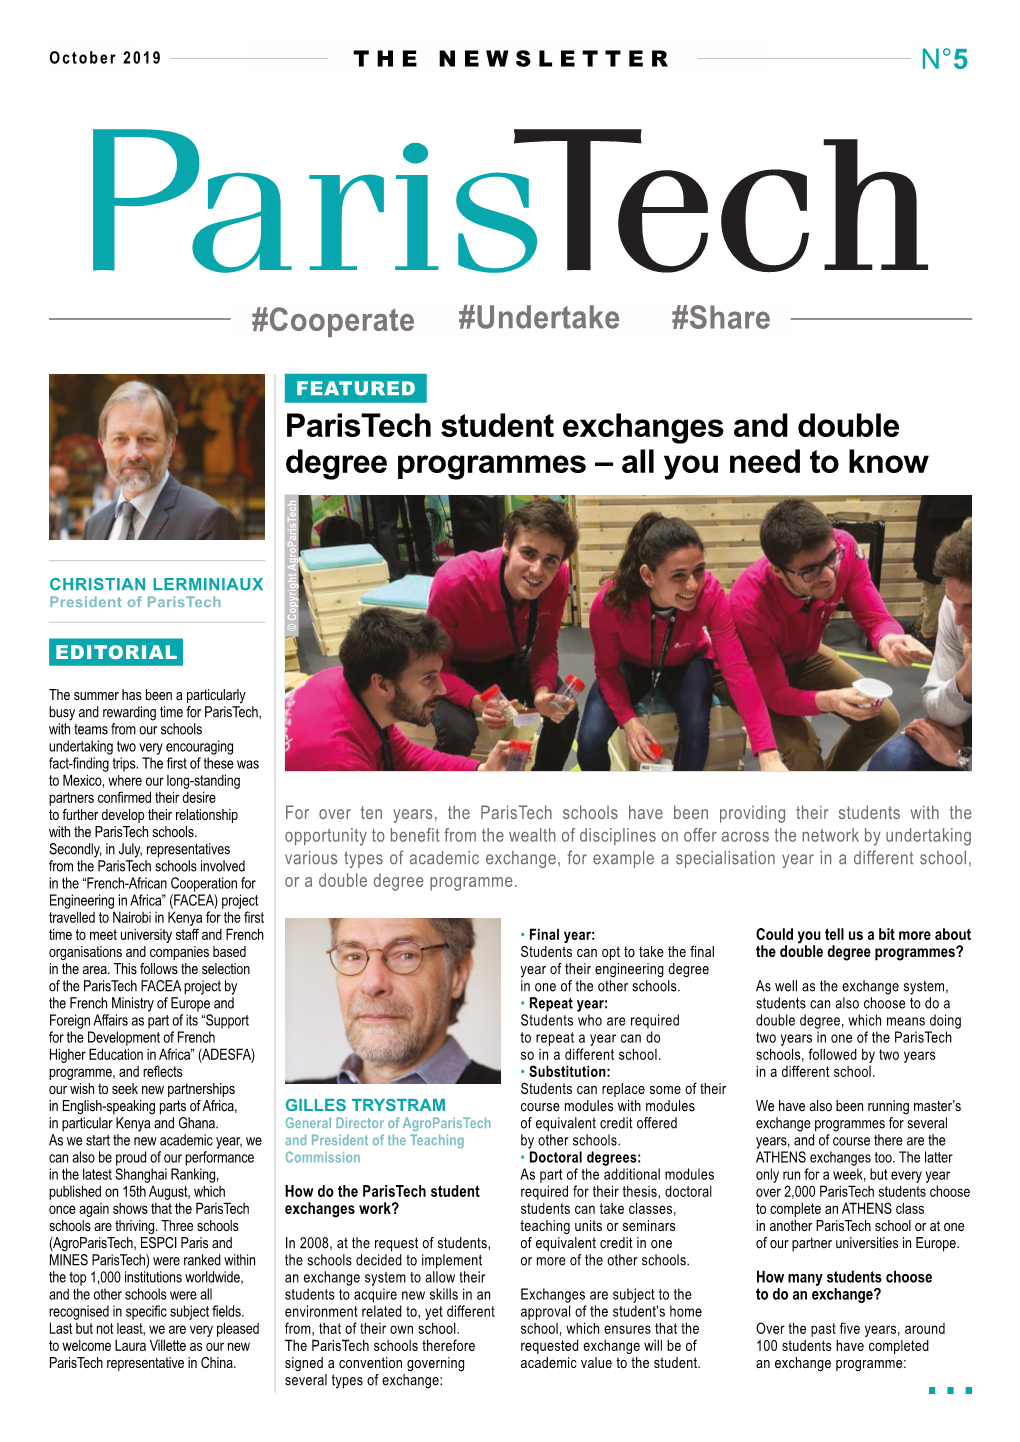 Paristech Student Exchanges and Dual Degree Programmes